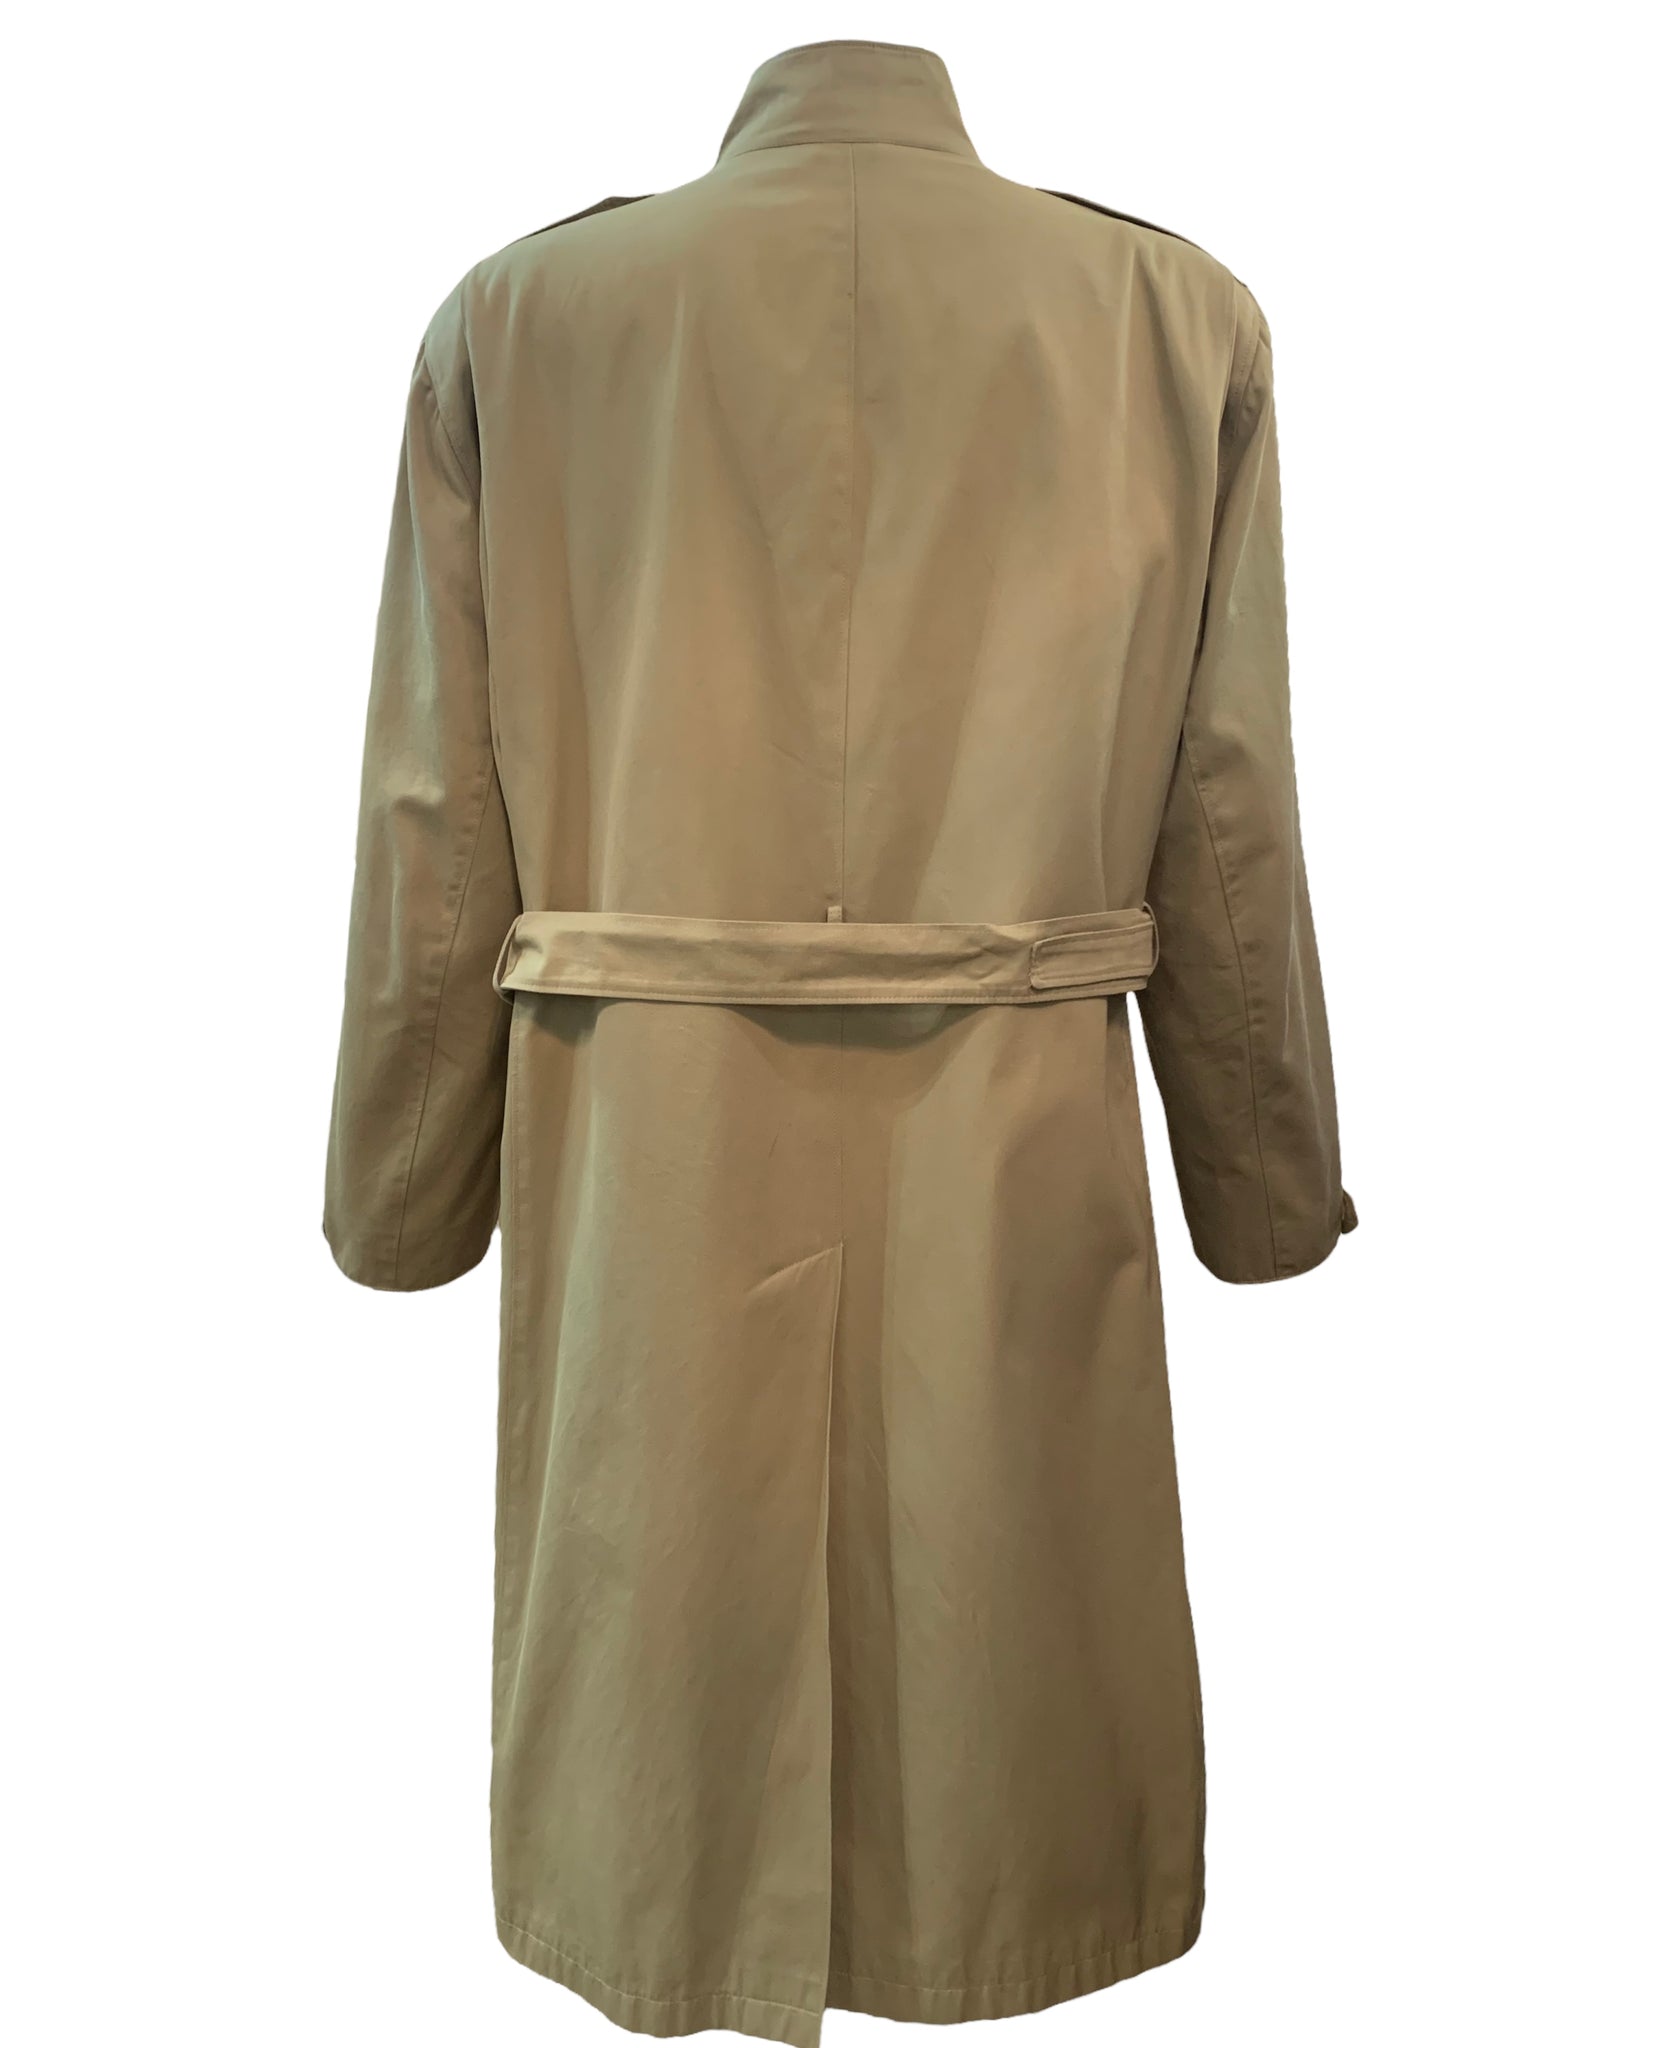 Gucci 80s Belted Trench Coat With Logo Buttons BACK 3 of 7